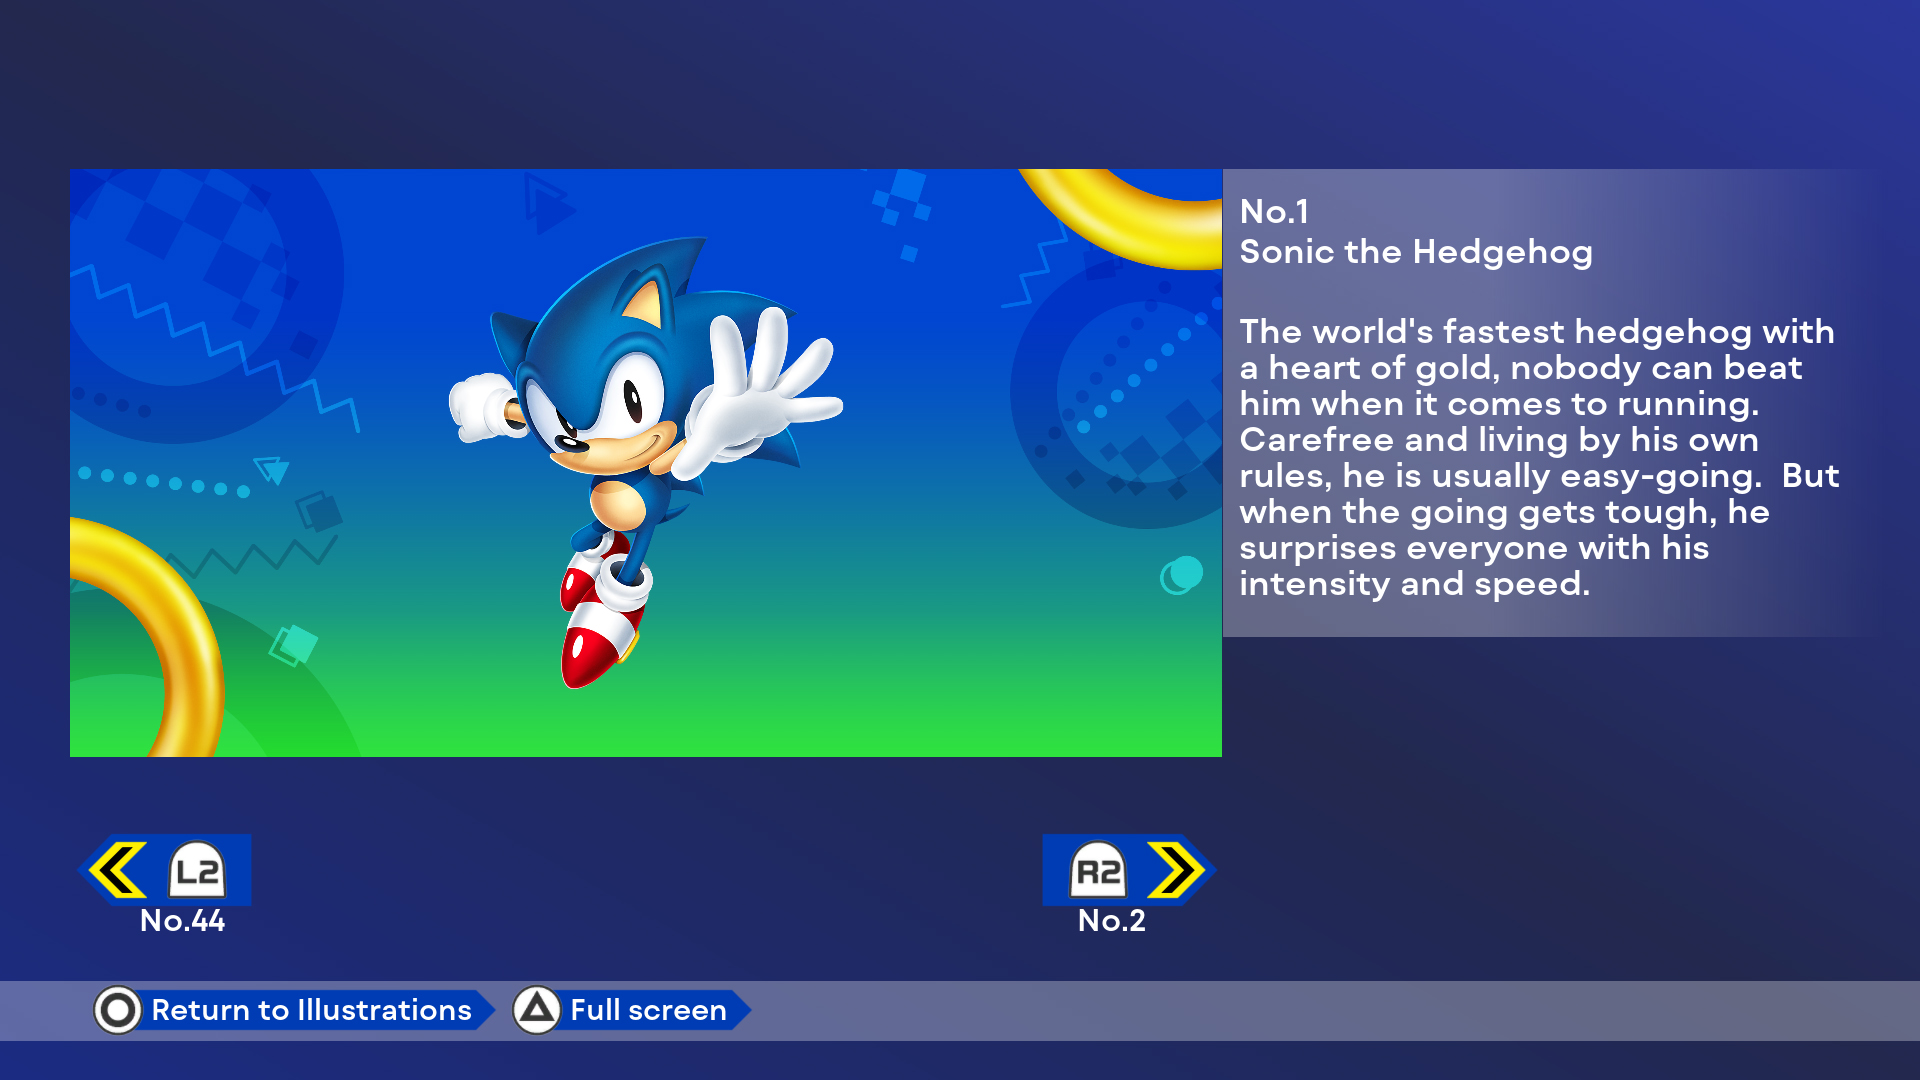 Hot102 - Sonic Origins Announced. During today's Sonic the